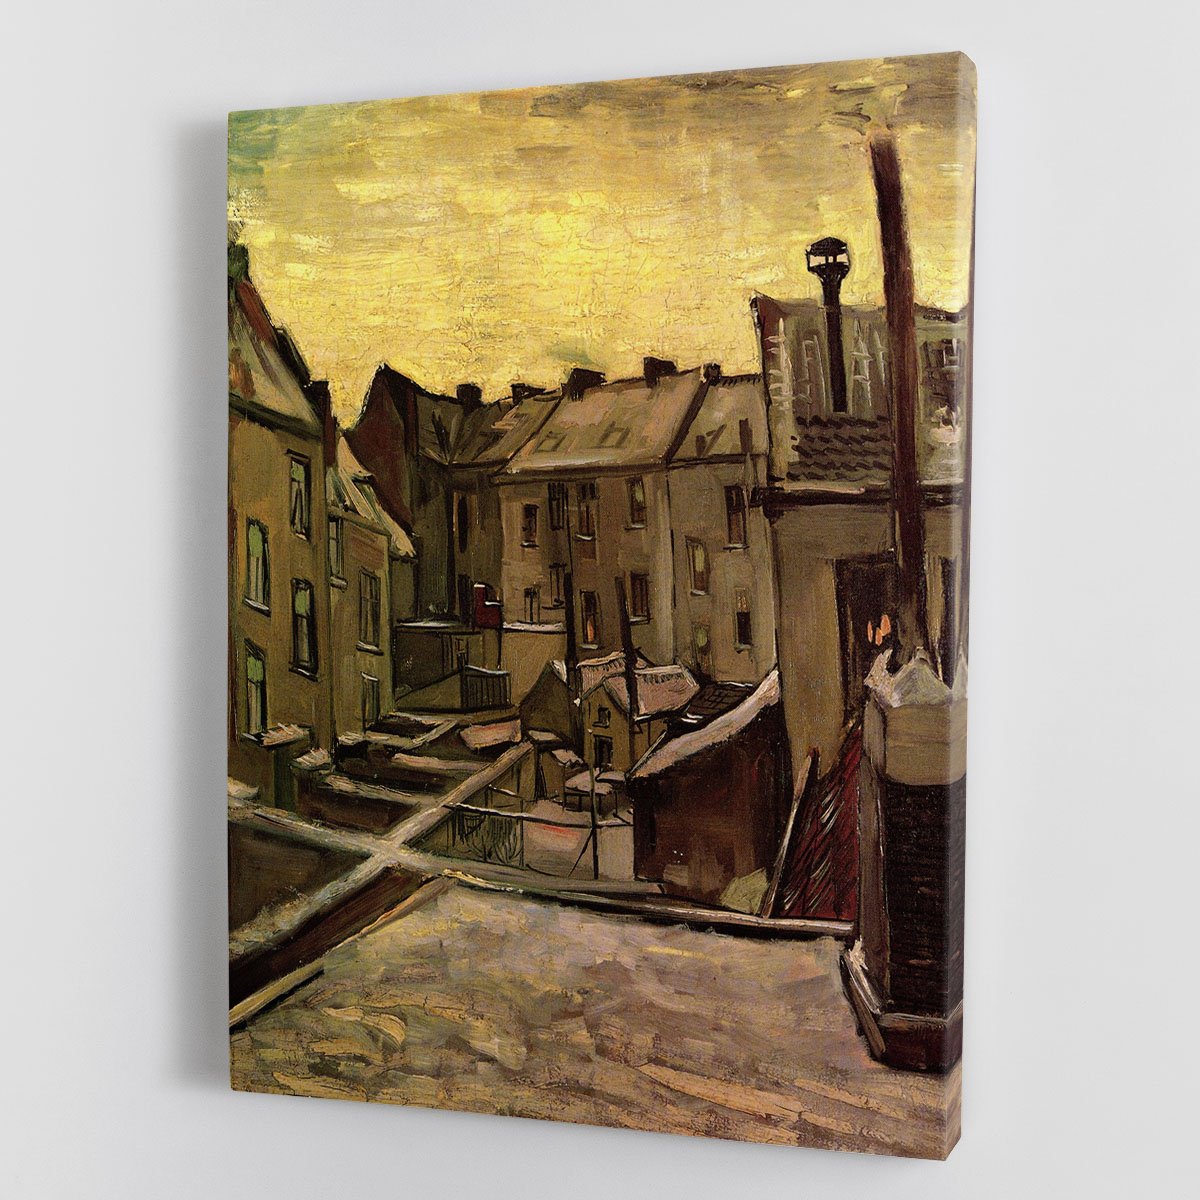 Backyards of Old Houses in Antwerp in the Snow by Van Gogh Canvas Print or Poster